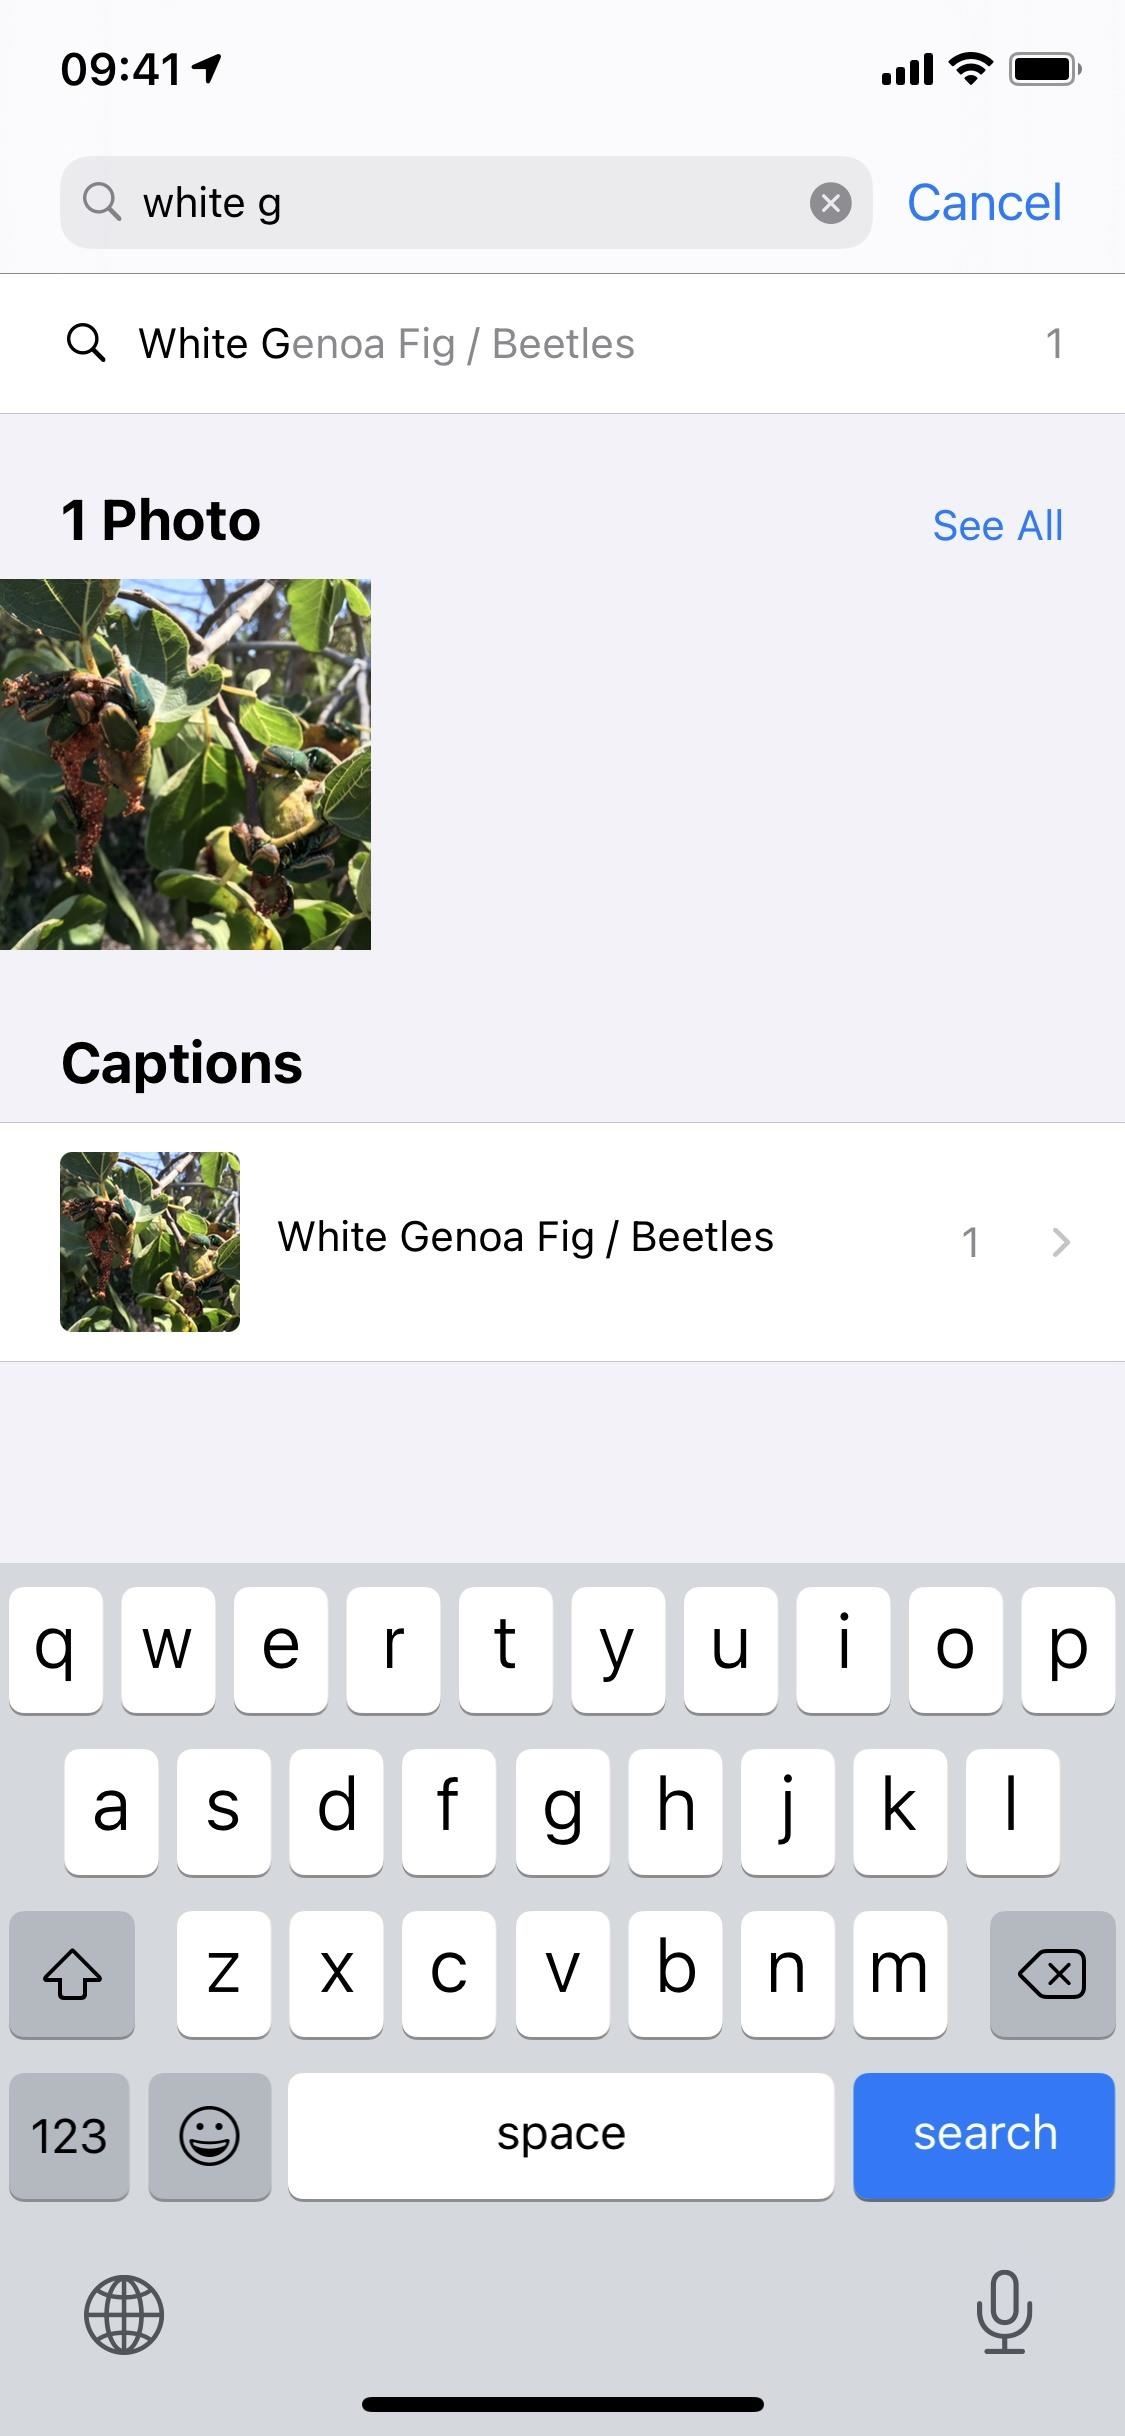 How to Add Captions to Photos & Videos in iOS 14 to Make Searching by Metadata Easier